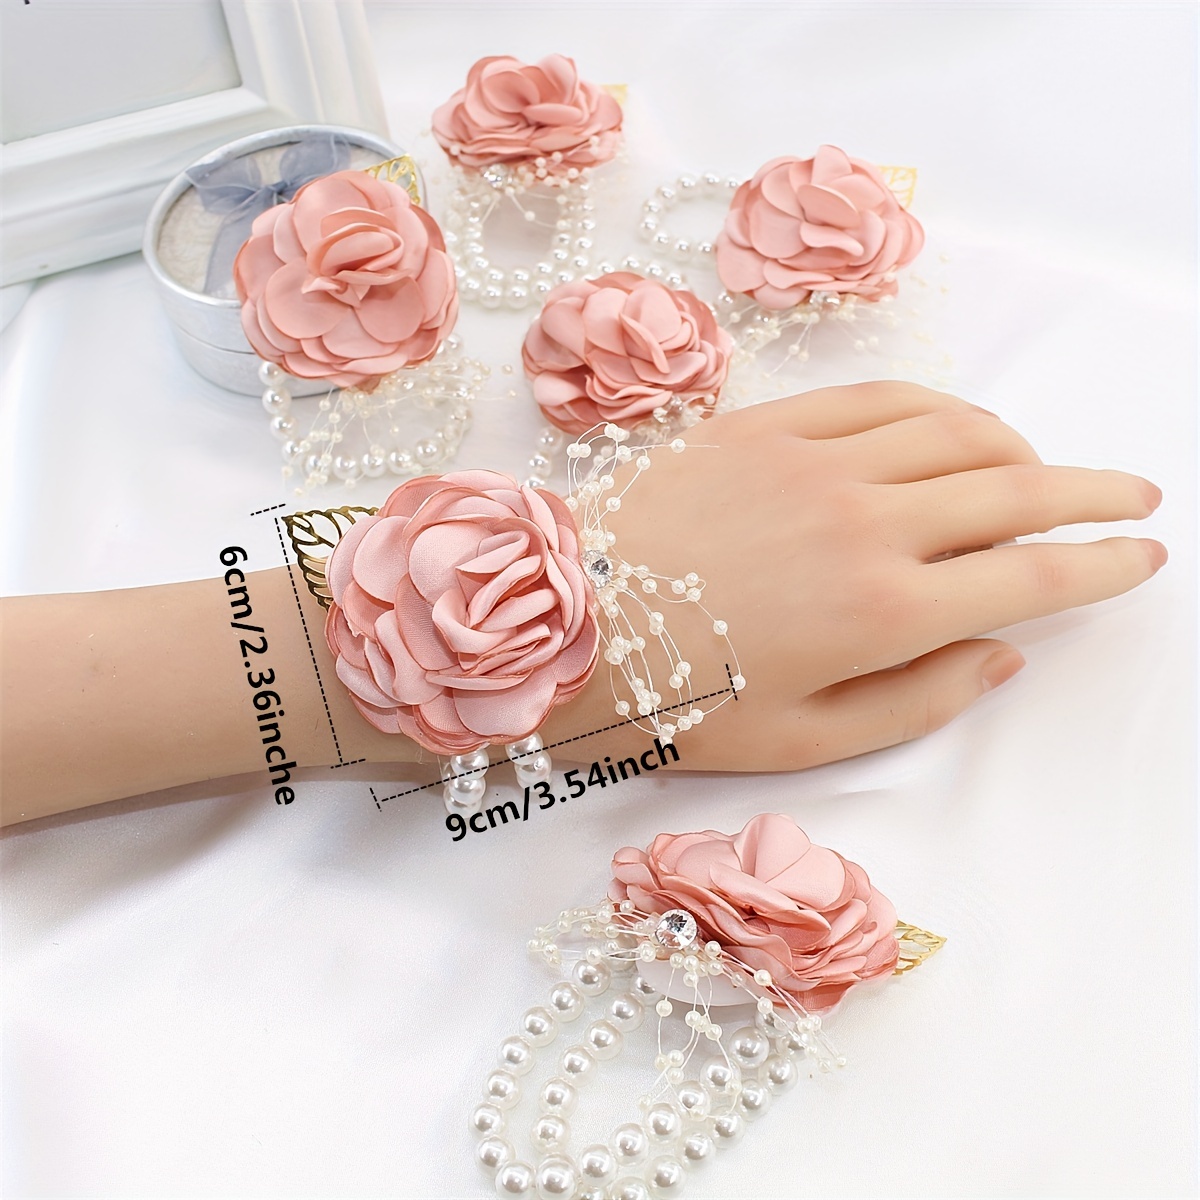 Gold Artificial Flowers Bridesmaid Artificial Silk Rose Ivory Wrist Corsage  Bracelet For Wedding Dancing Party Decor Sisters Handmade Flower From  Meiqizaoxi, $7.26